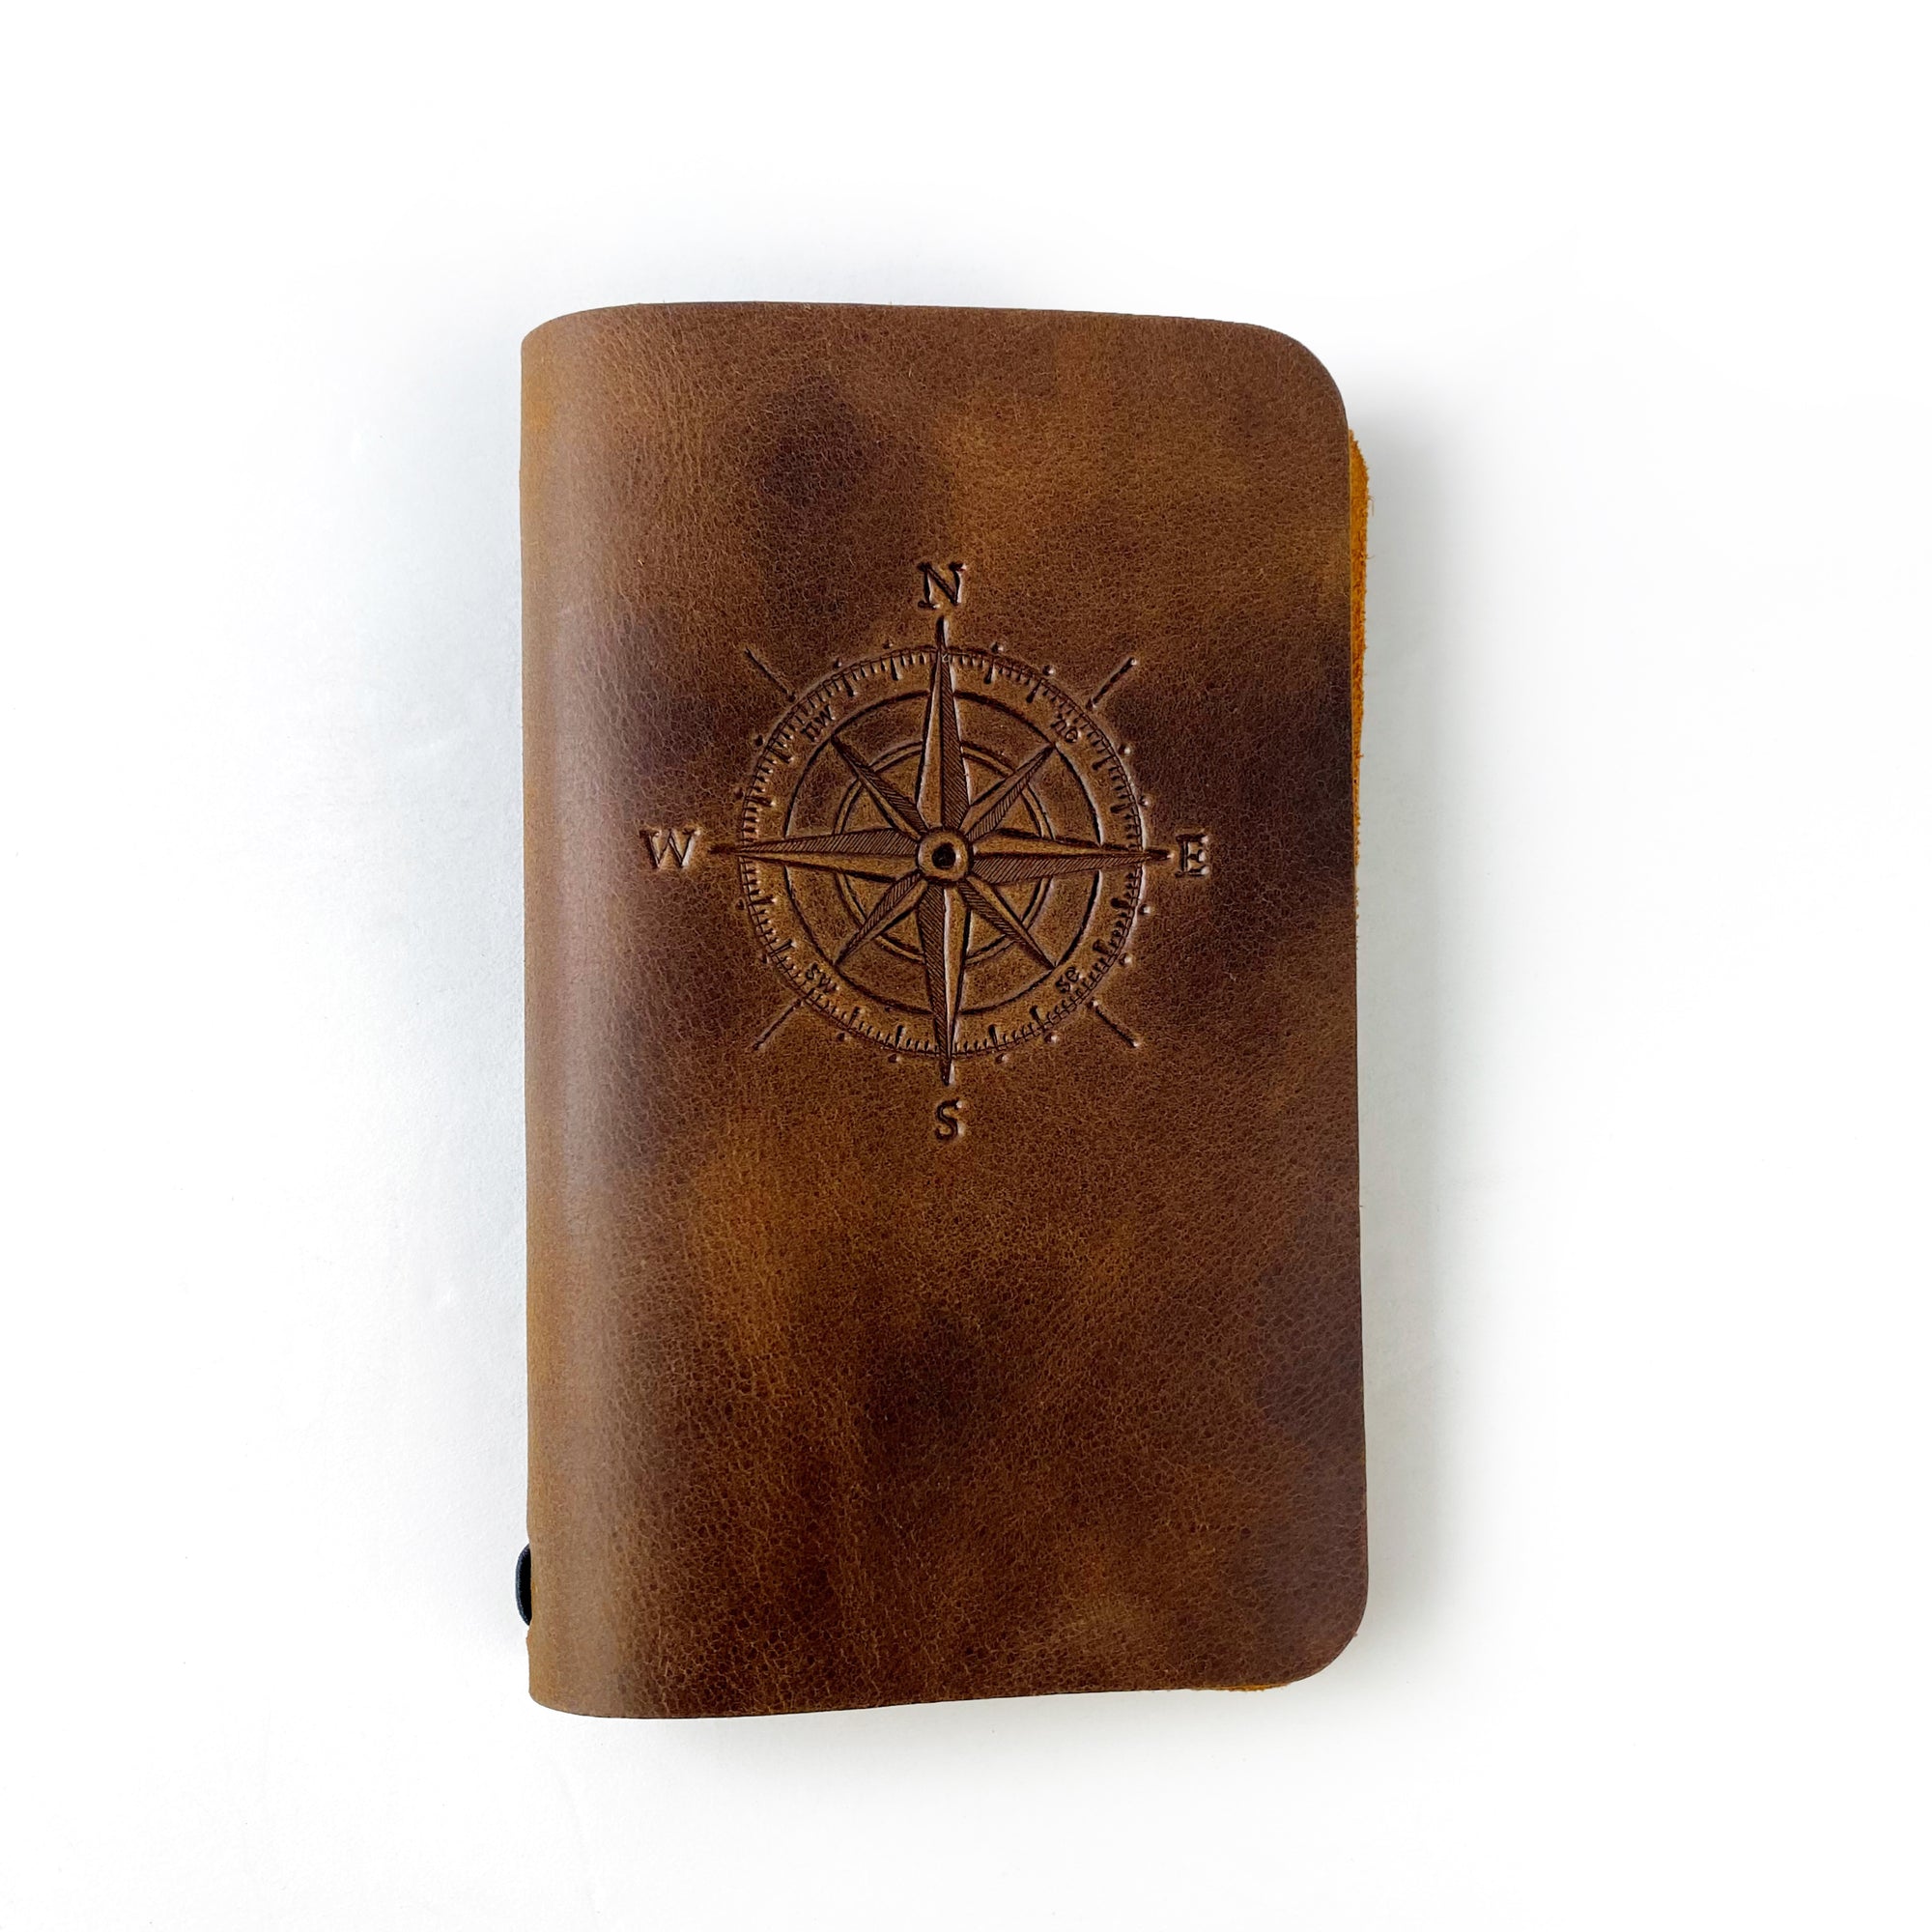 Leather Journal with compass engraving.